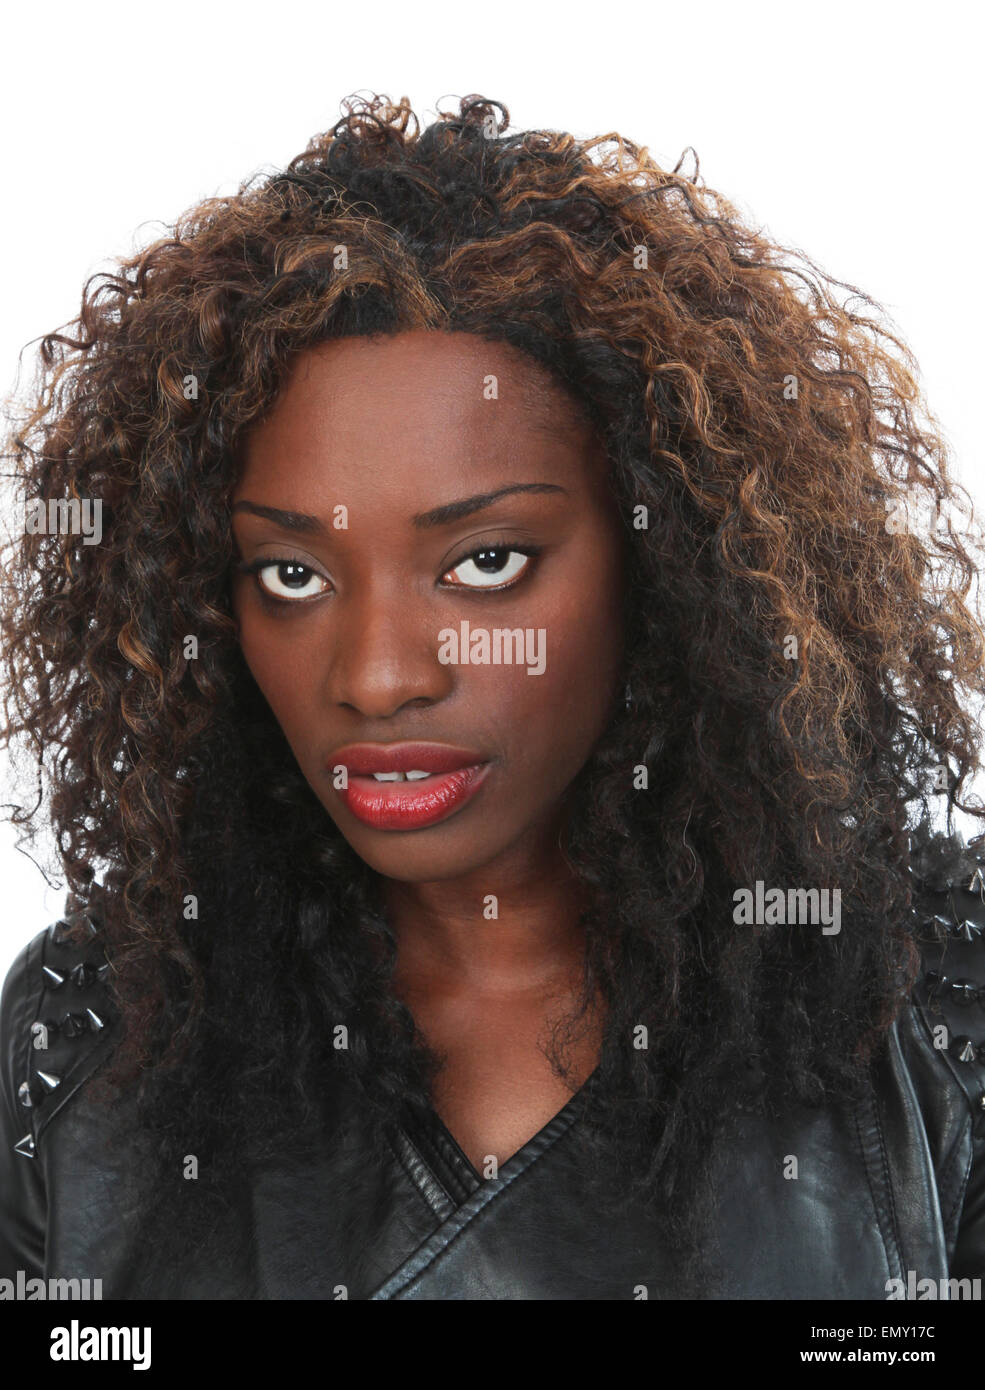 Glamorous Black woman in a black leather jacket with wild hair and piercing eyes Stock Photo